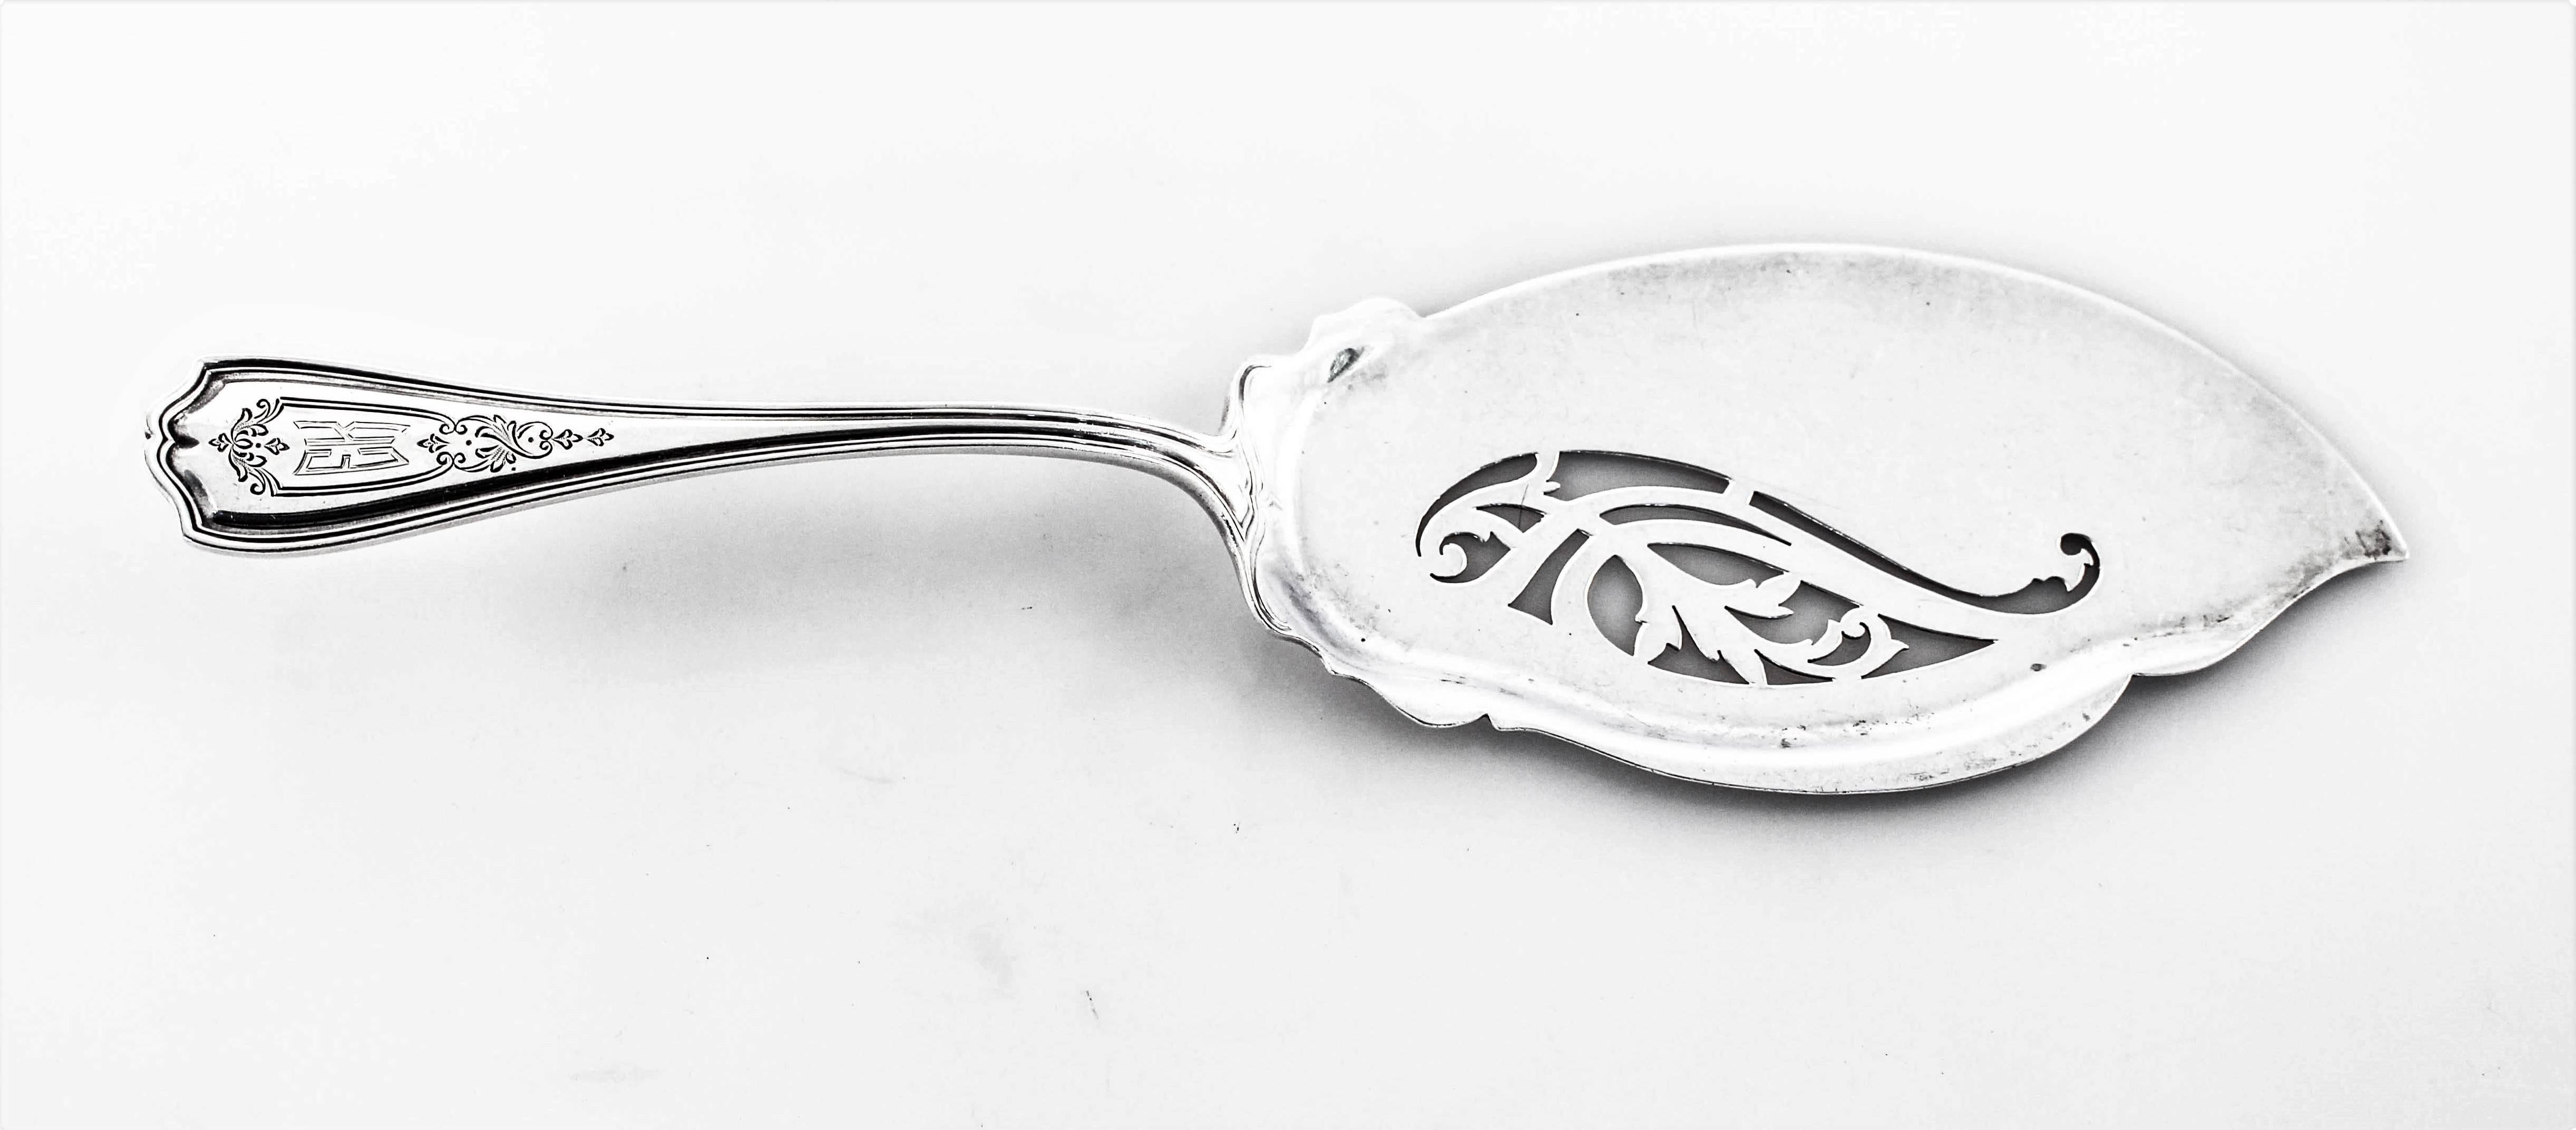 The fork and server have chased work on their handle and pretty cutout work towards the top. On the fork, a diamond-like cutout nestled between the tines. On the server, a paisley shaped cutout compliments its shape. A hand engraved monogram of EK